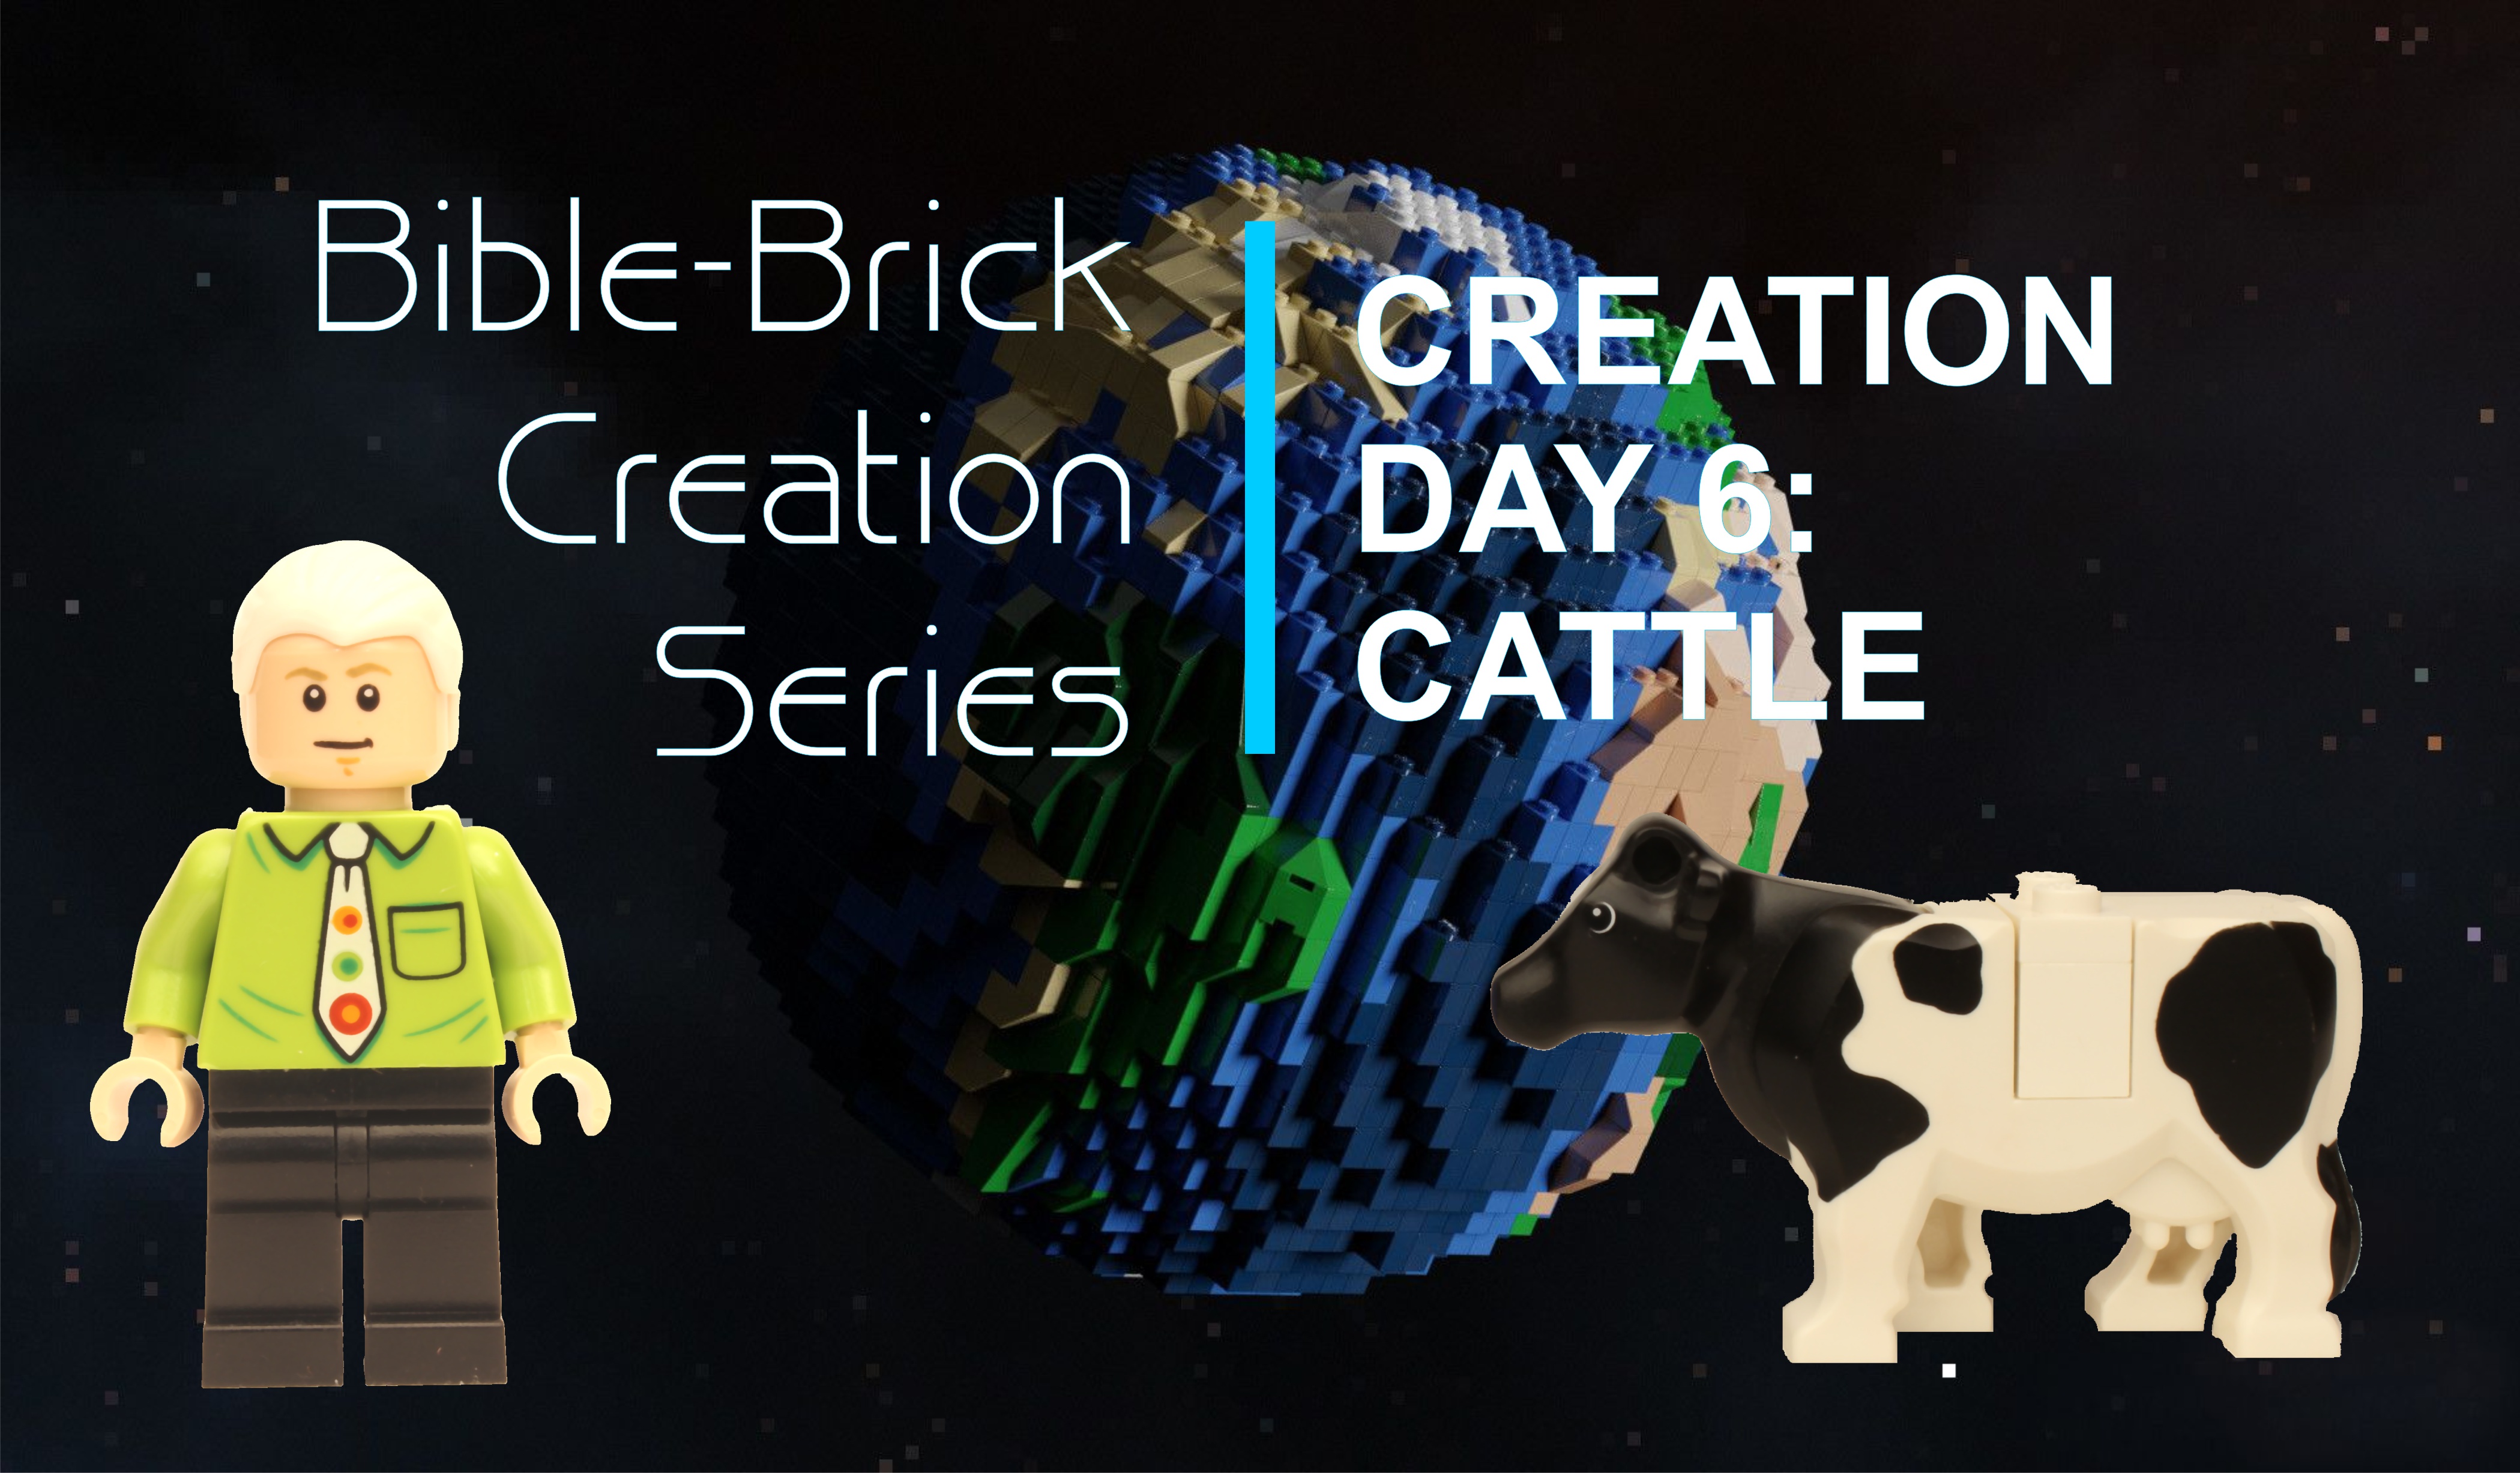 Creation #23 Day 6 Cattle